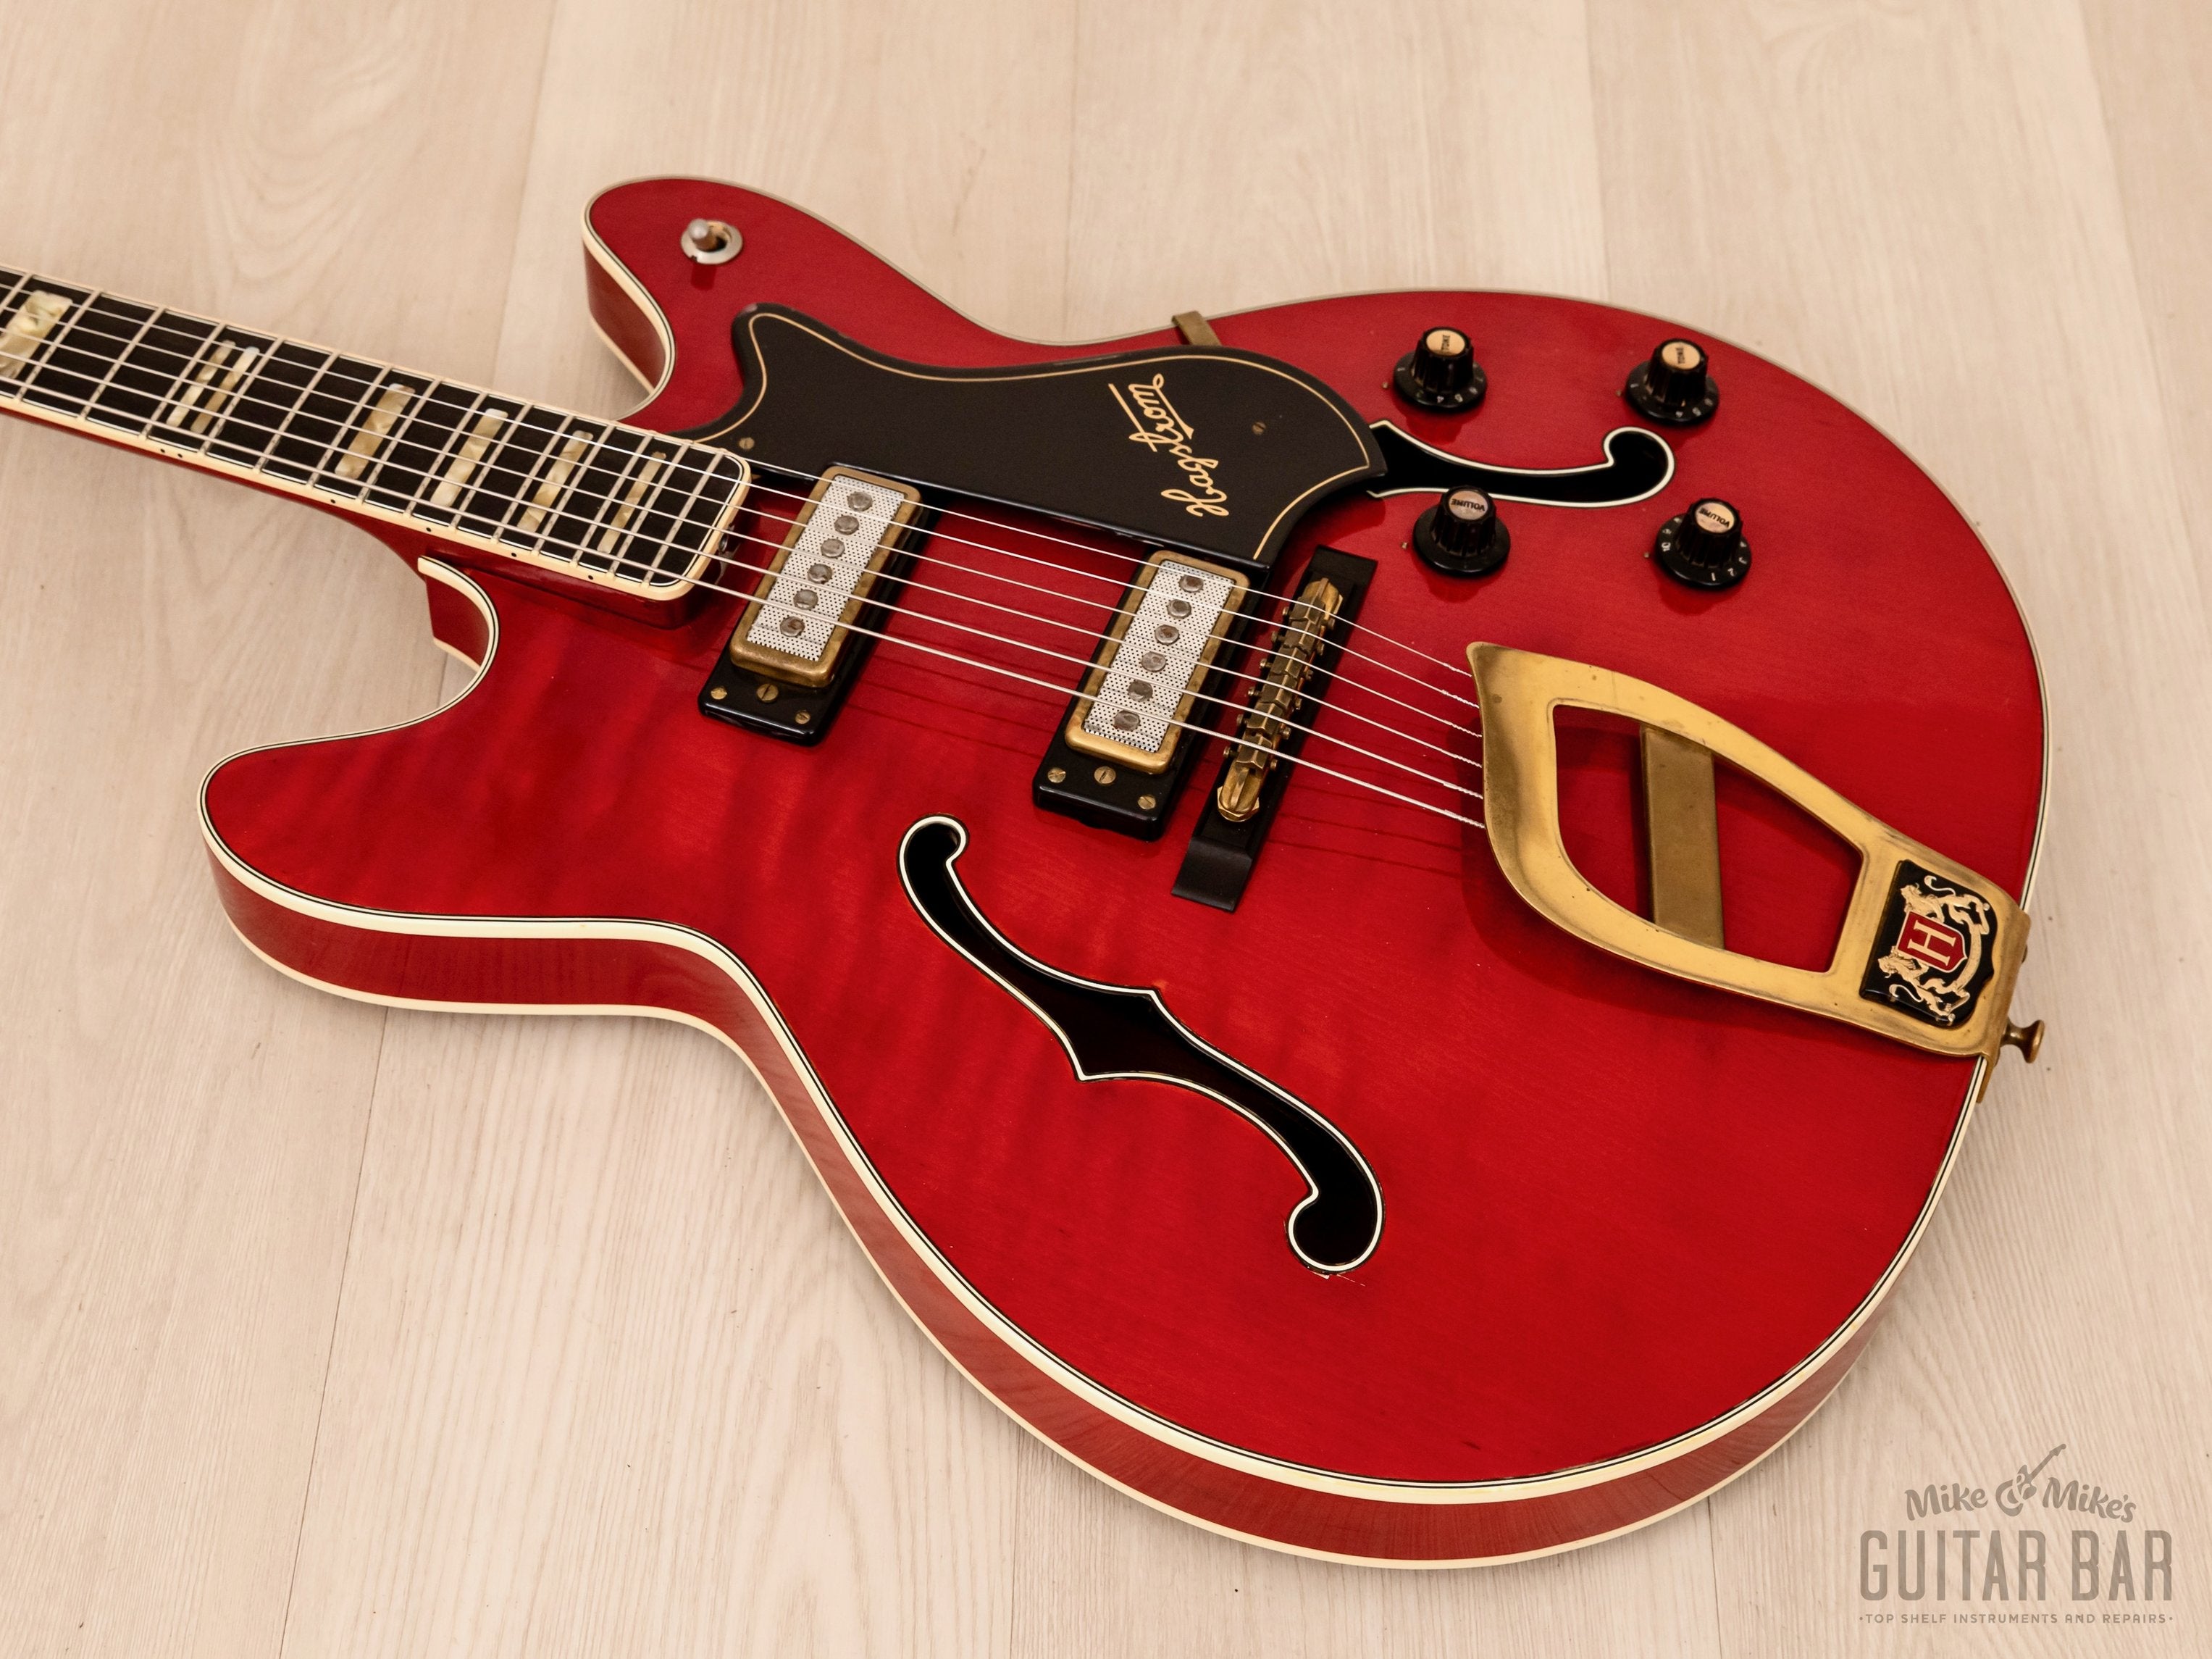 1968 Hagstrom Viking Deluxe V2 Vintage Hollowbody Cherry Red w/ Case, Elvis Comeback Special